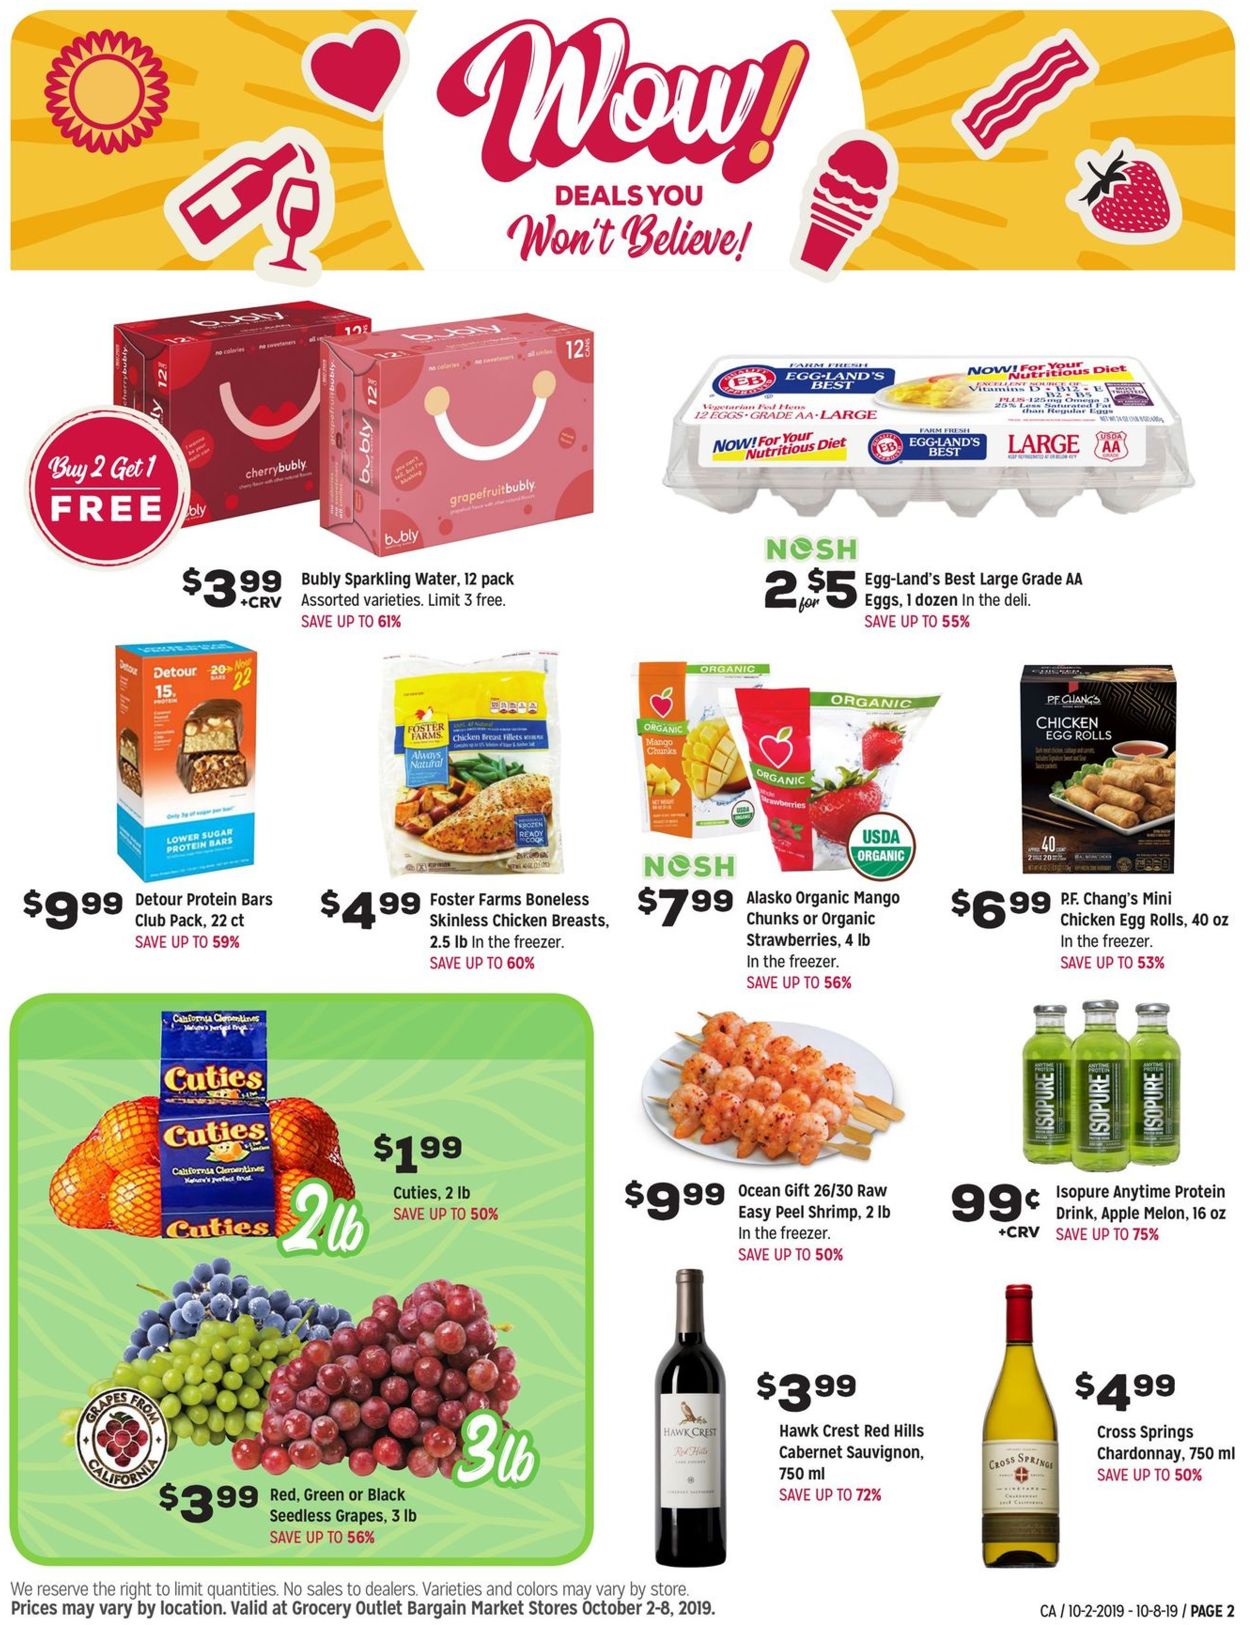 Grocery Outlet Current weekly ad 10/02 - 10/08/2019 [2 ...